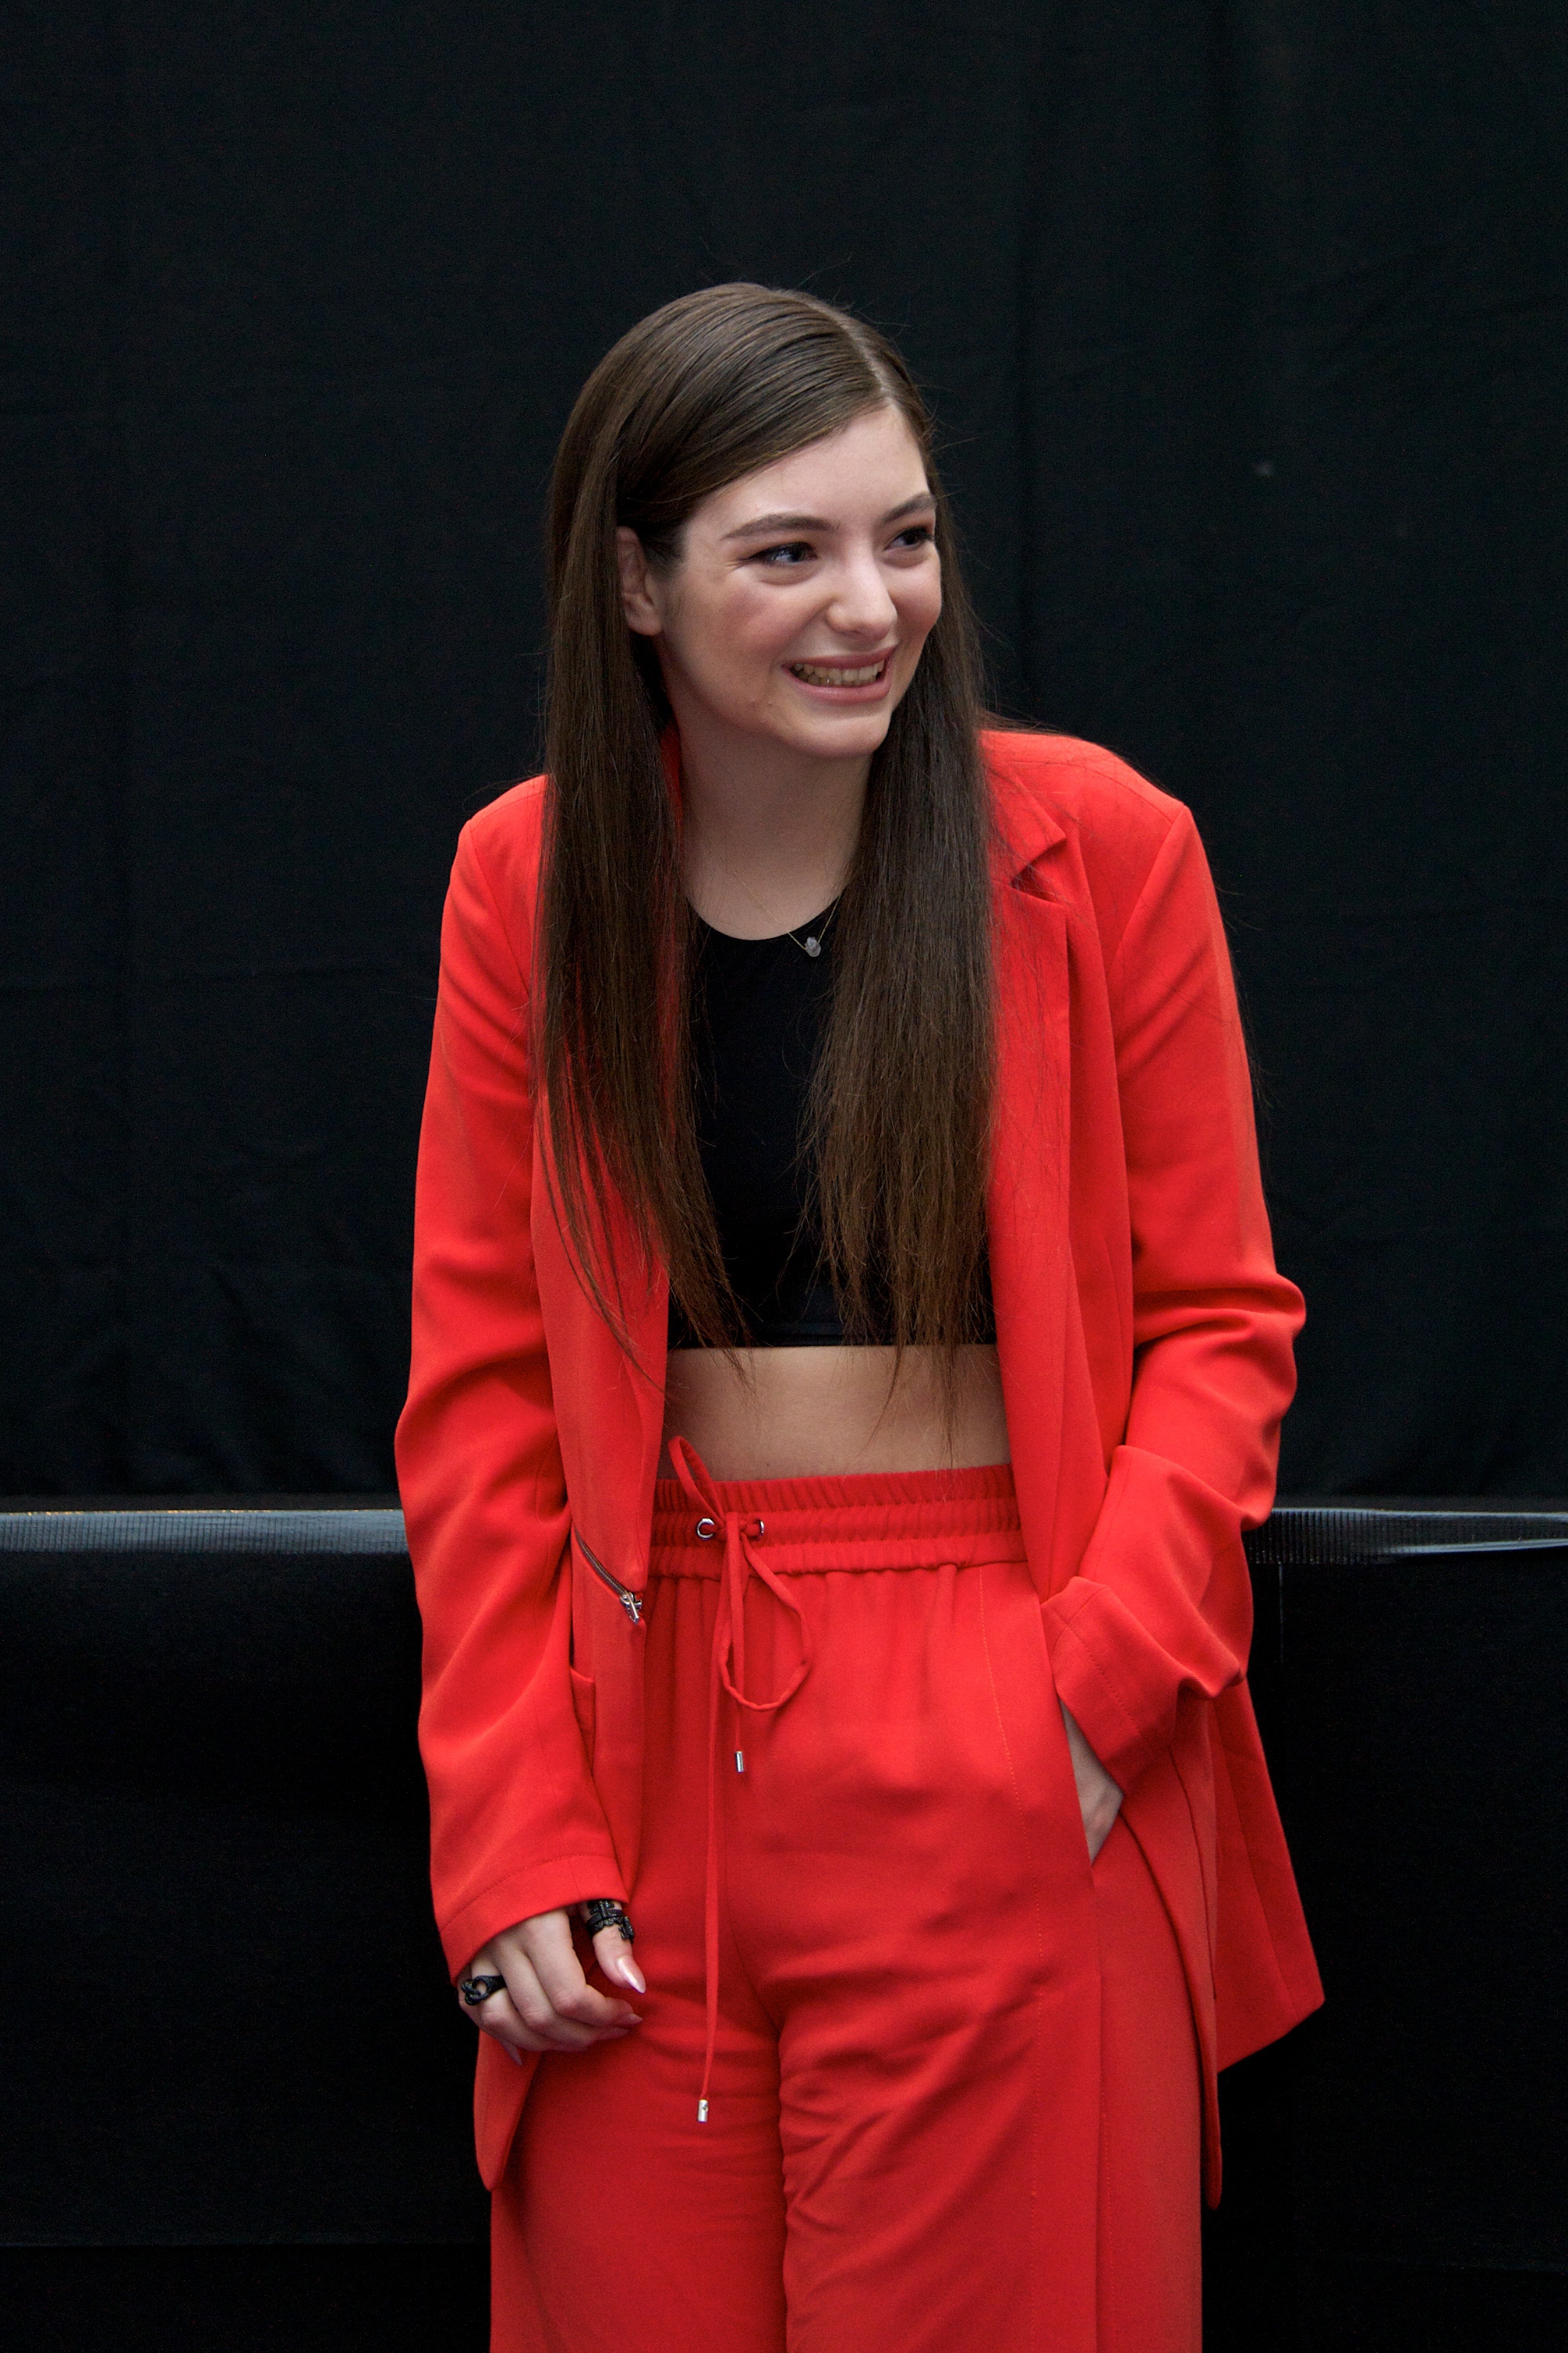 Lorde makes Rolling Stone's Top 100 Songs of the 21st Century - NZ Herald